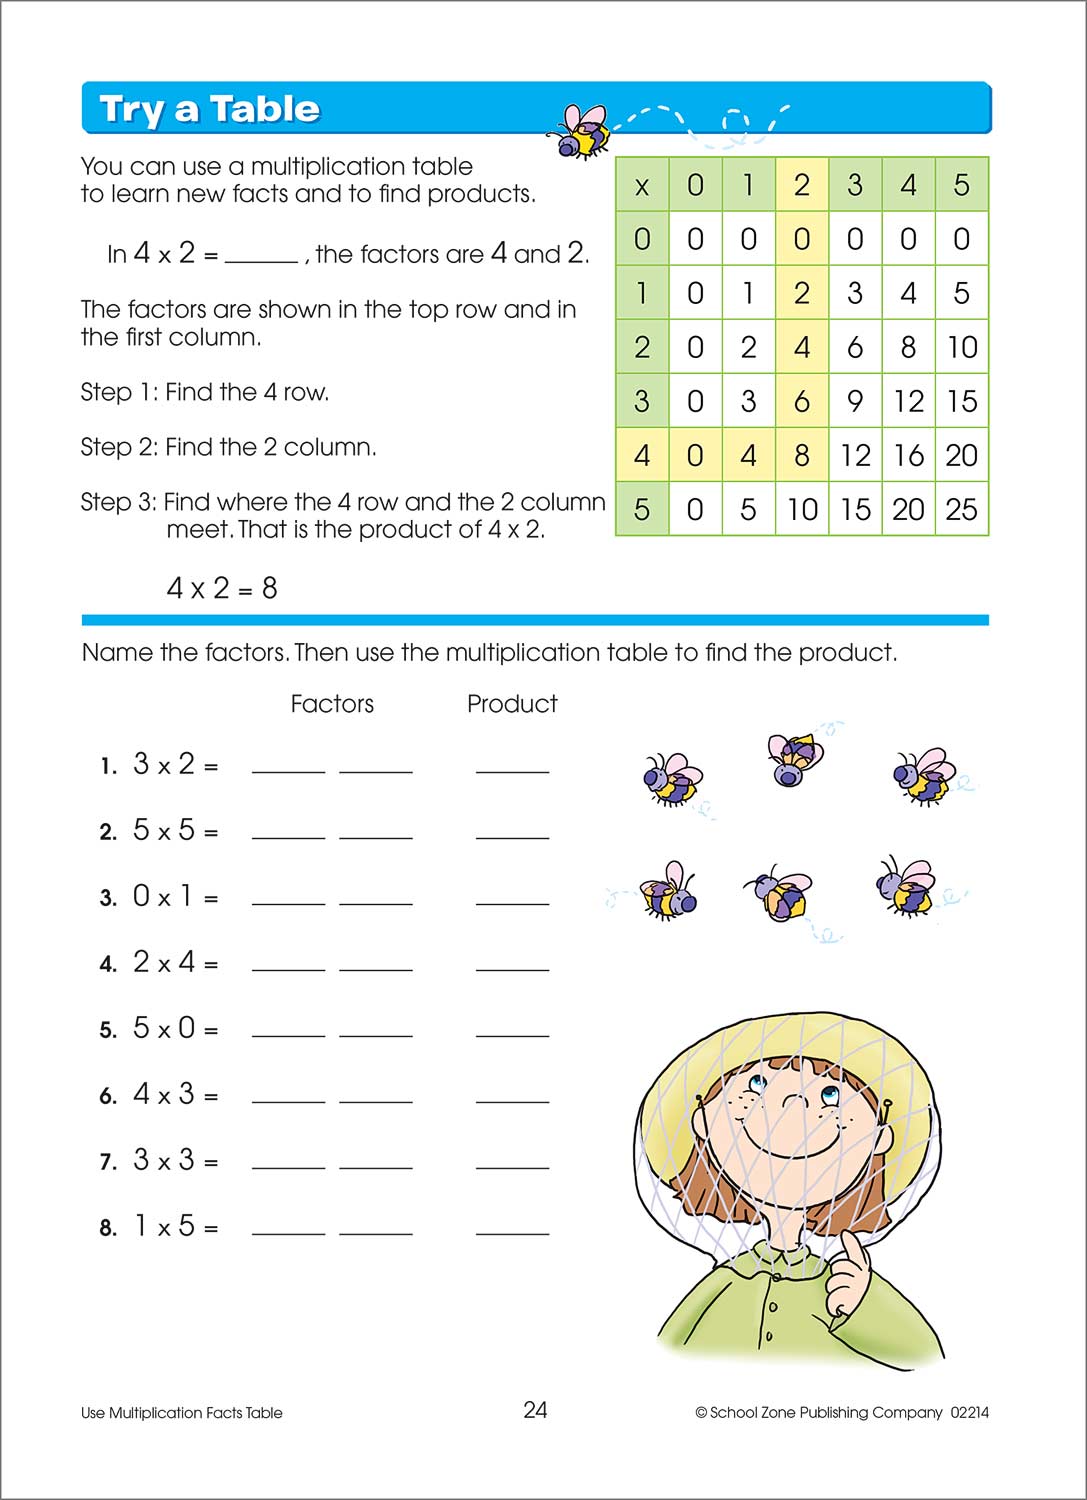 Multiplication Facts Made Easy 3-4 Deluxe Edition Workbook - Kool & Child